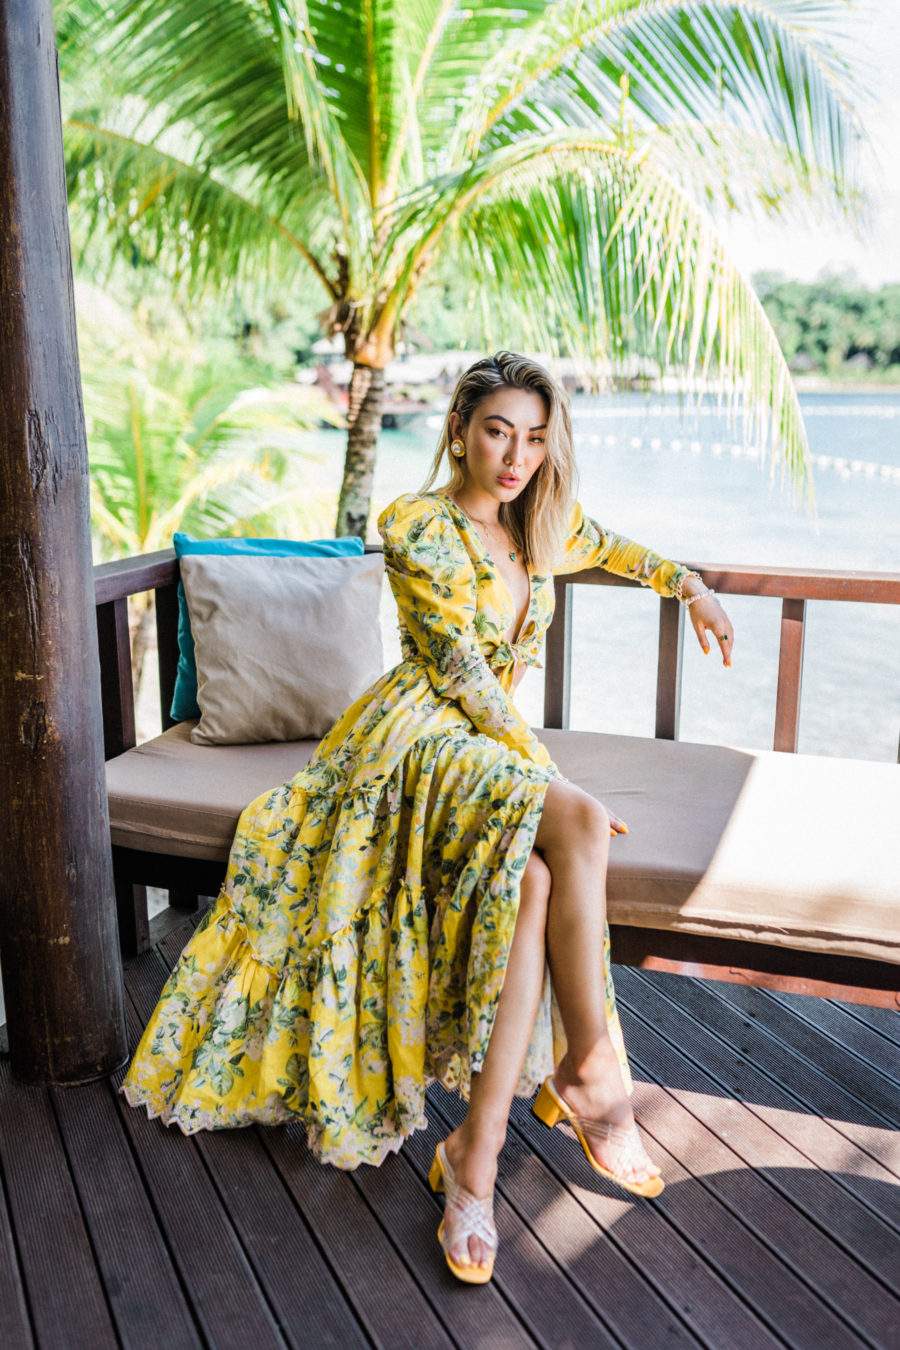 Vintage Fashion Trends - Yellow Floral dress, yellow square toe sandals // Jessica Wang - Notjessfashion.com